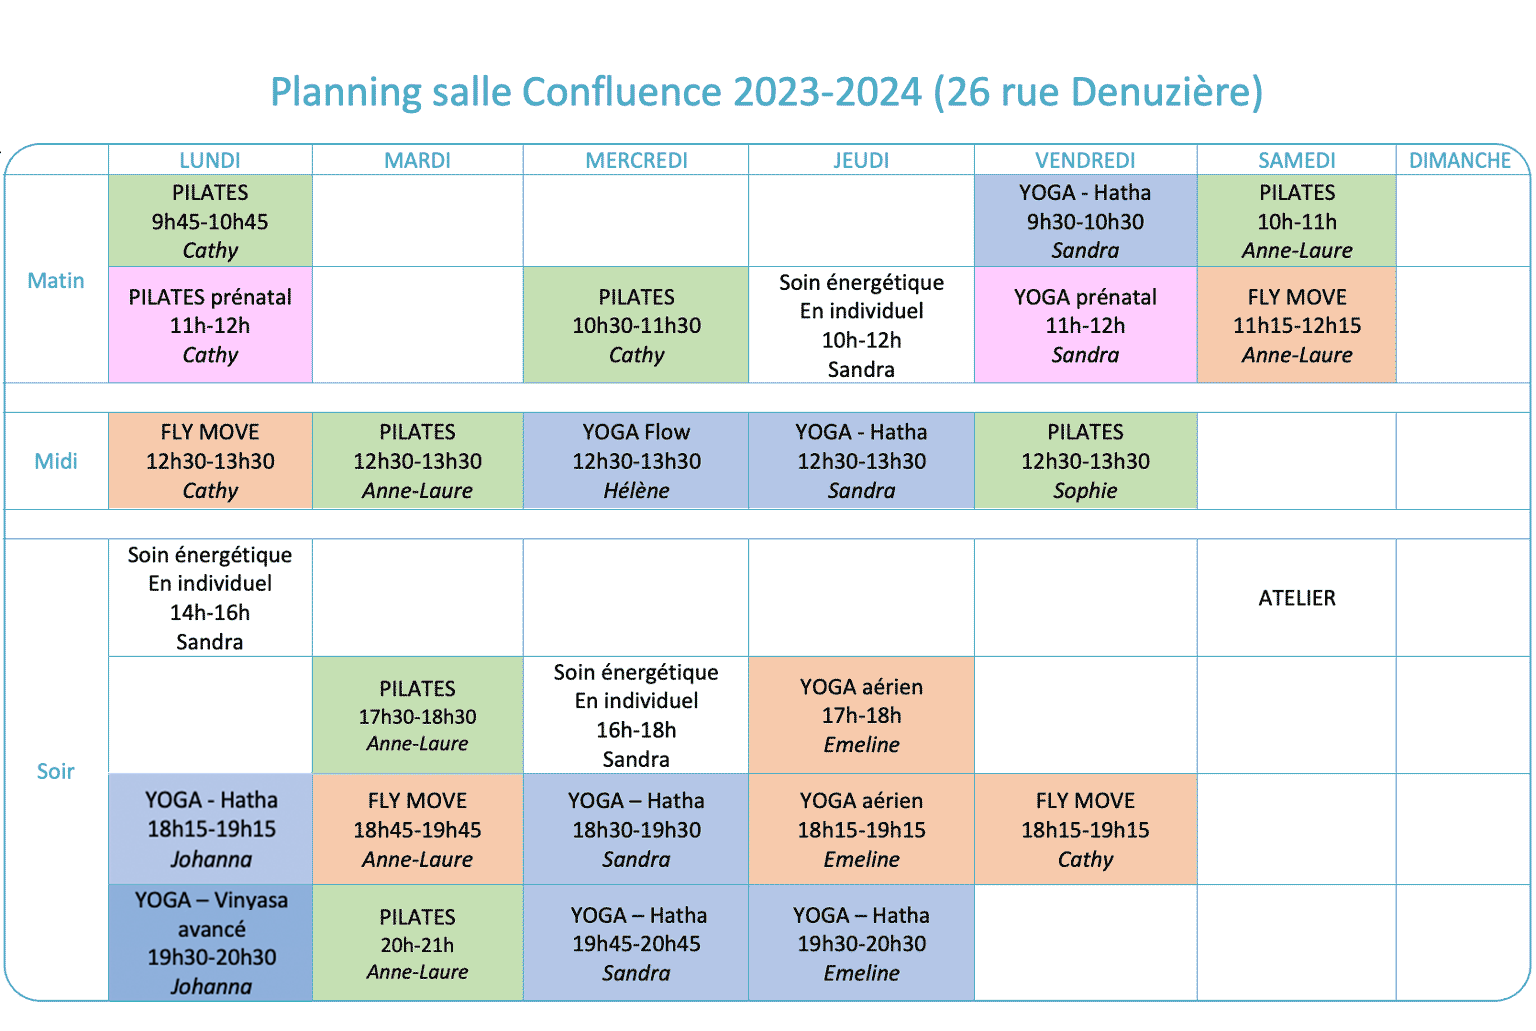 Planning Small salle Confluence 2023-2024